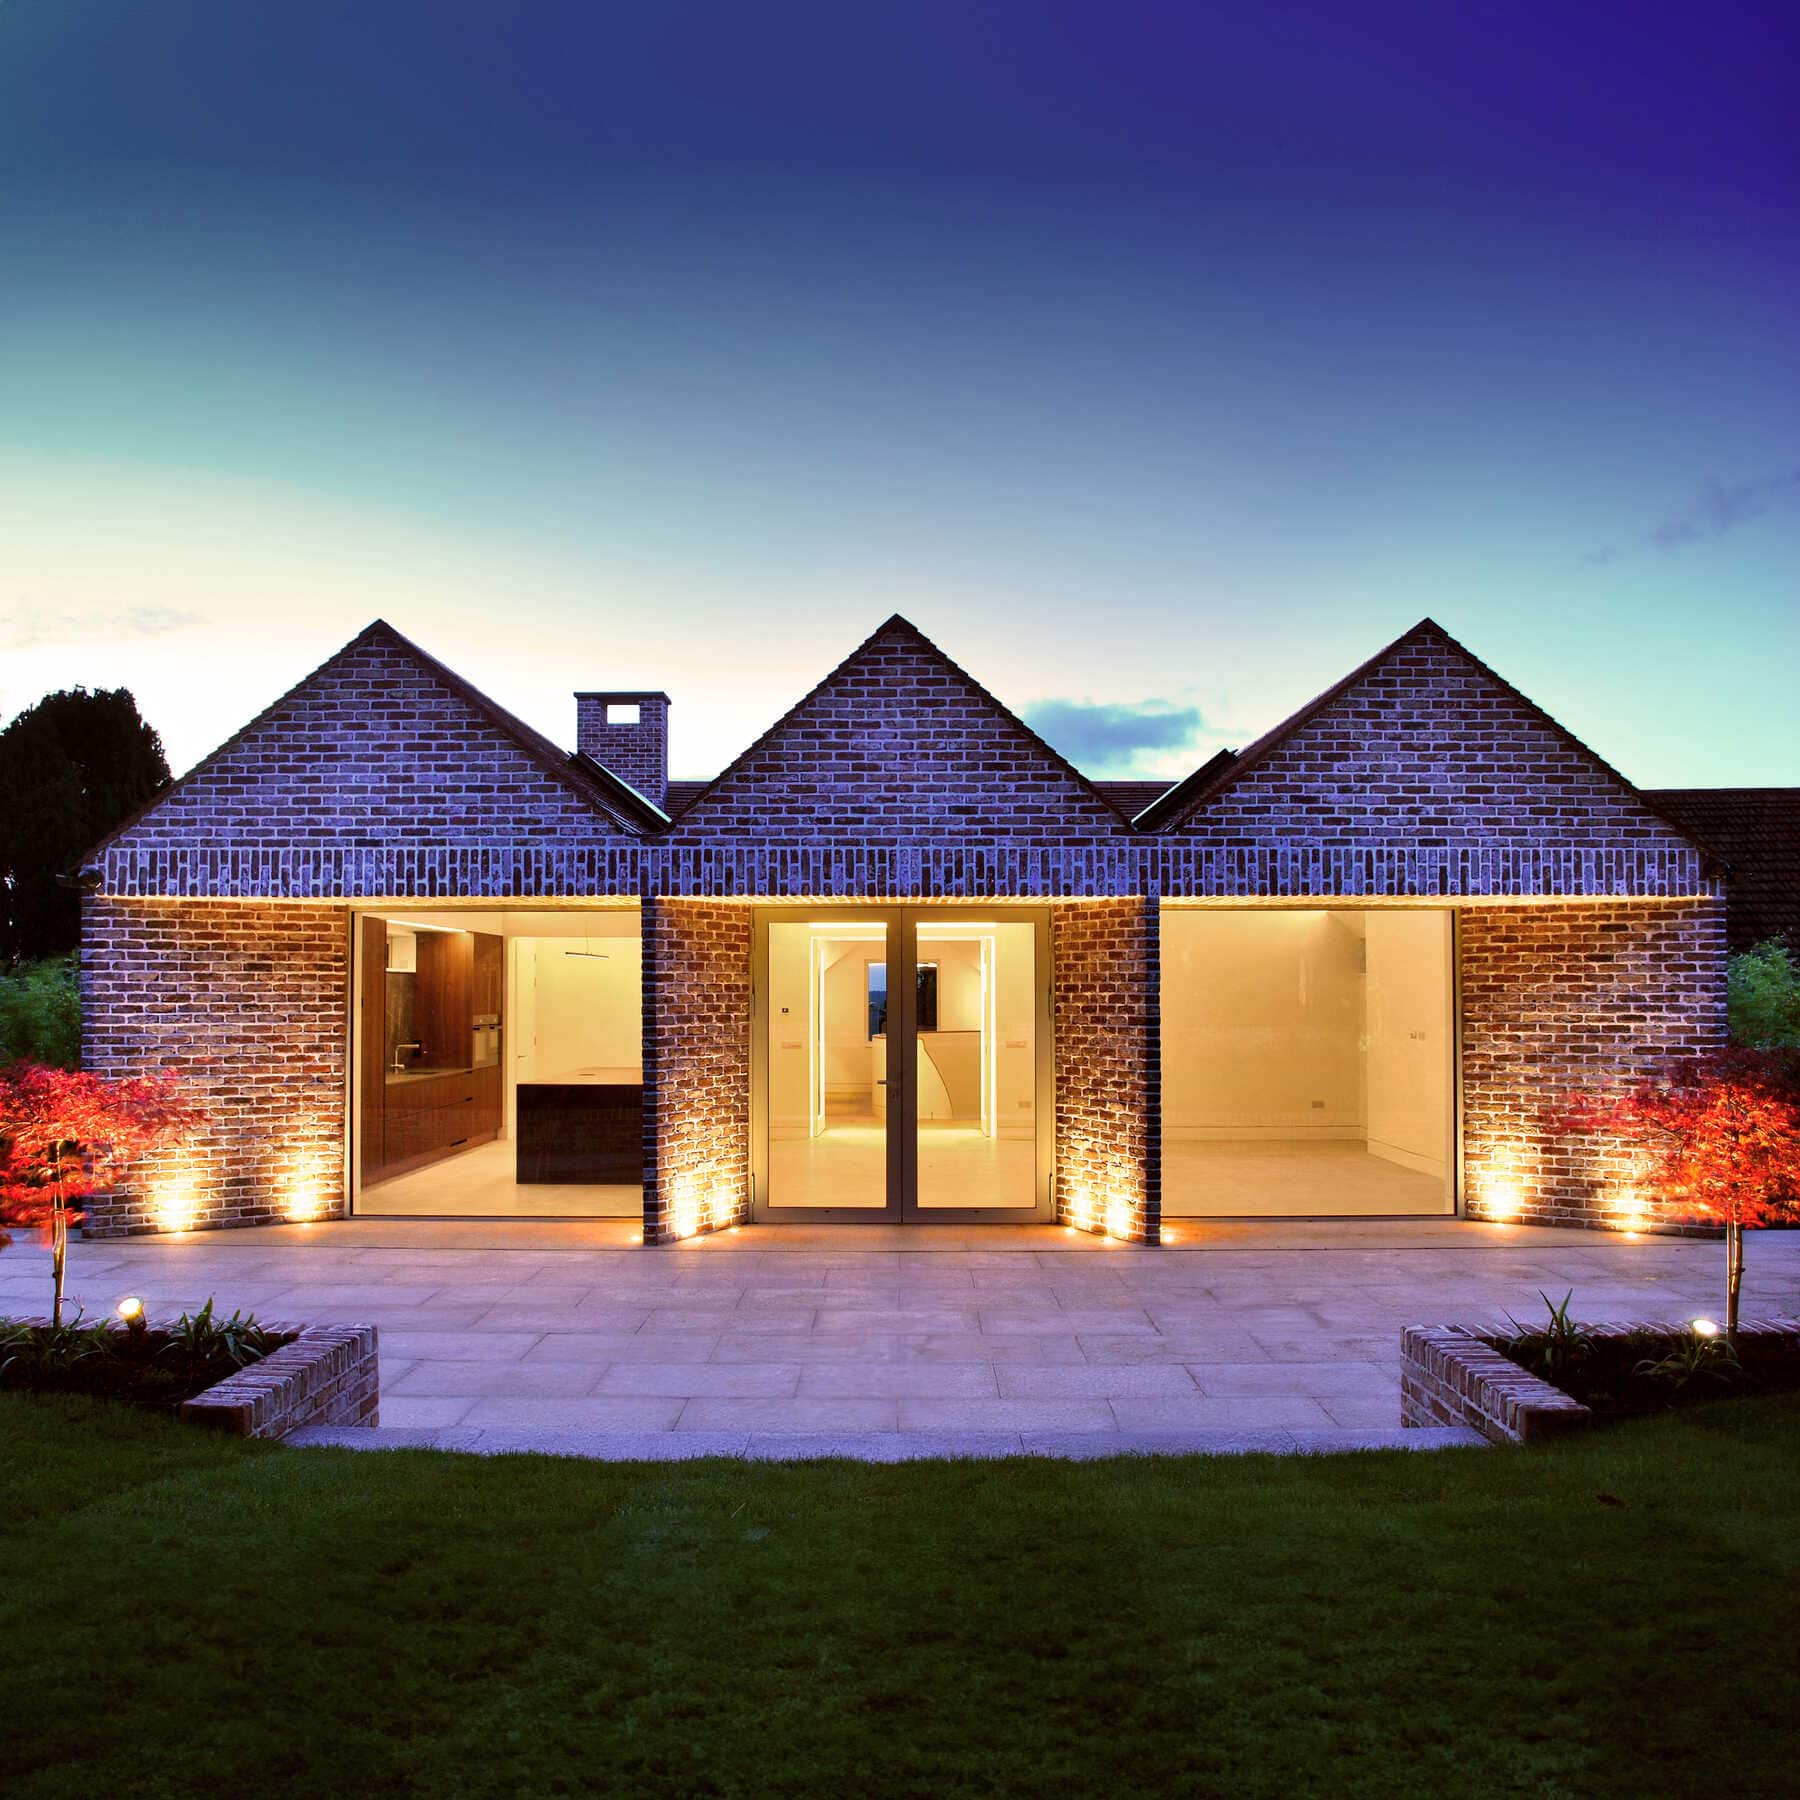 Modern new build by Architects Dublin with a stunning front elevation